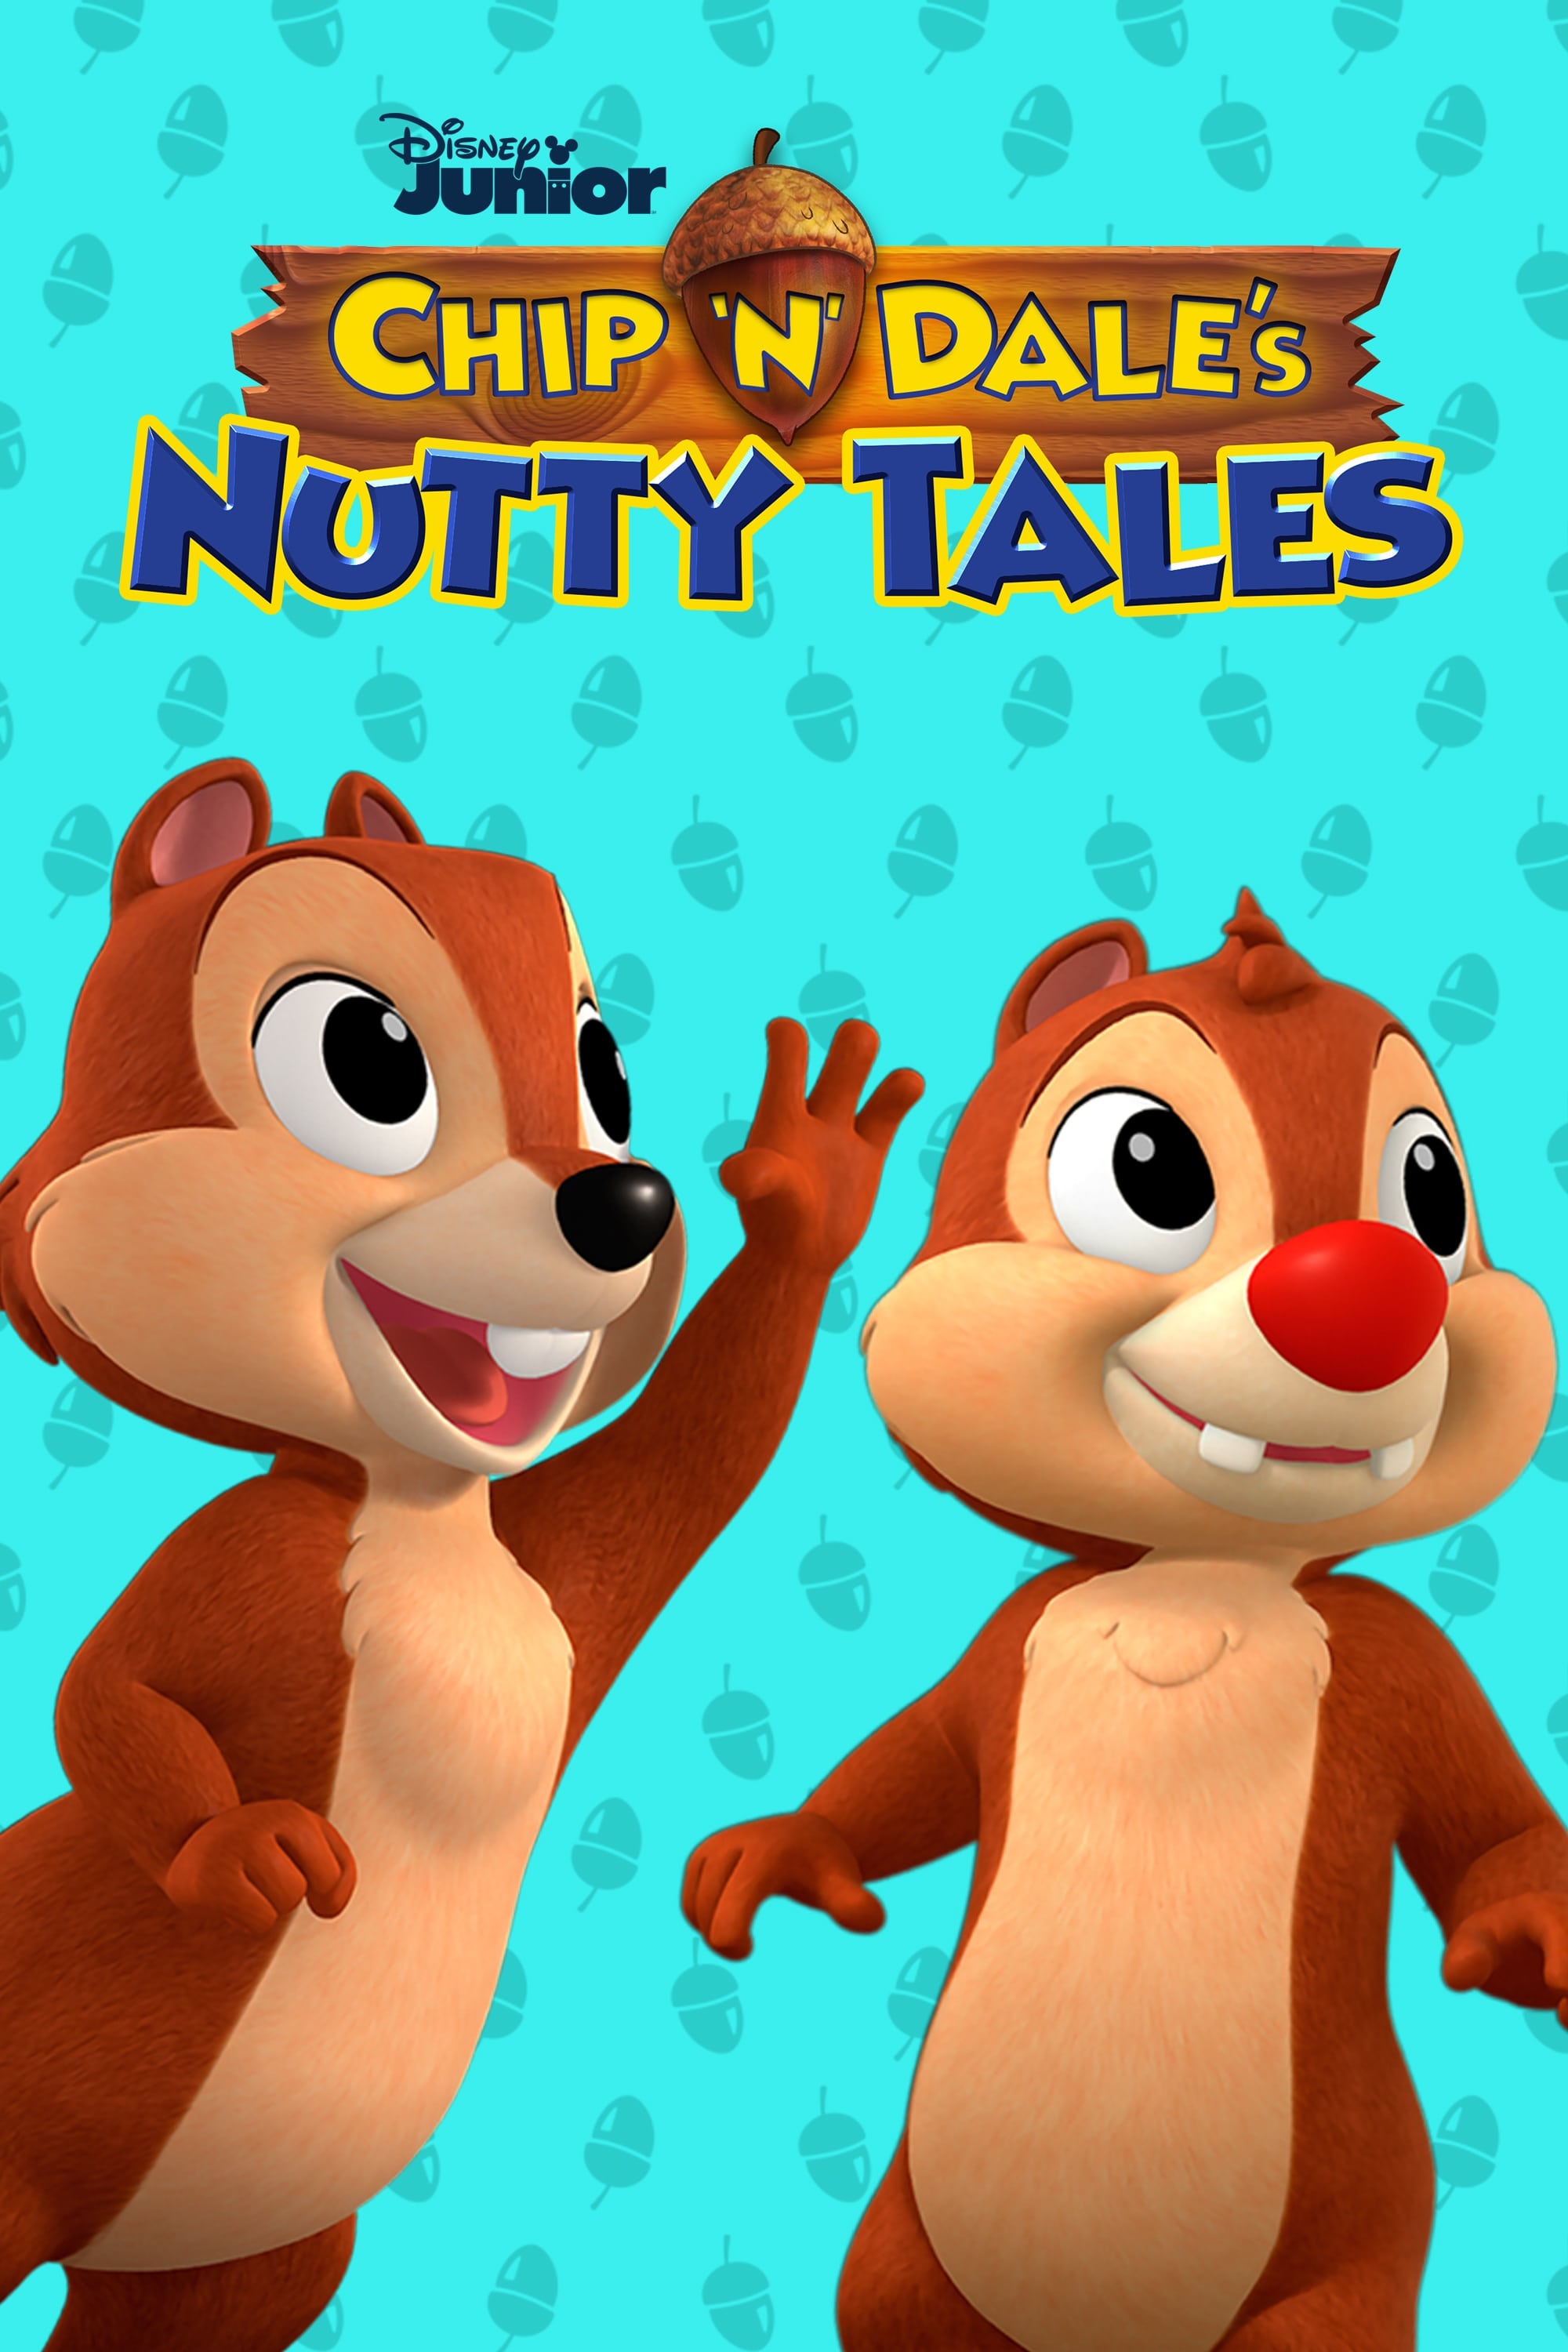 Chip 'n Dale's Nutty Tales (2017)